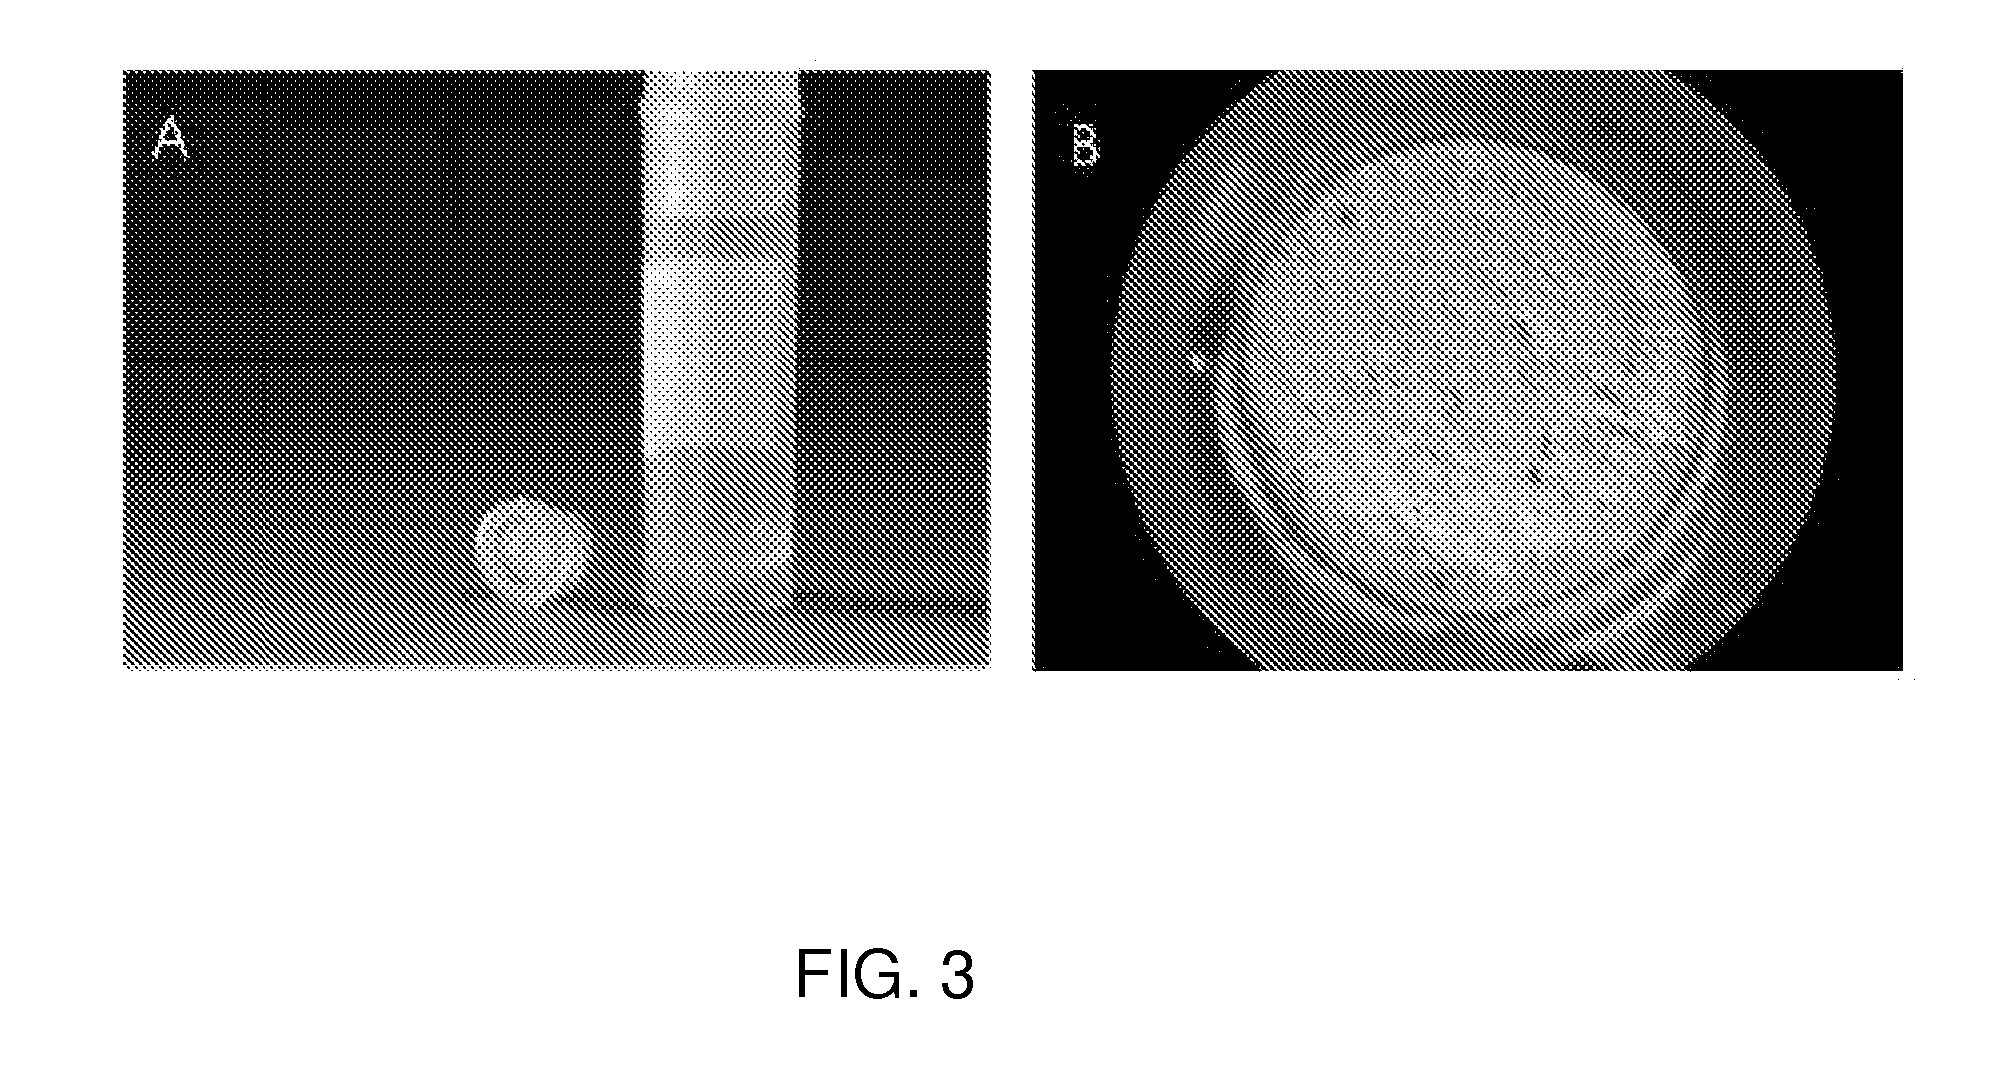 Method for the cryopreservation of cells, artificial cell constructs or three-dimensional complex tissues assemblies